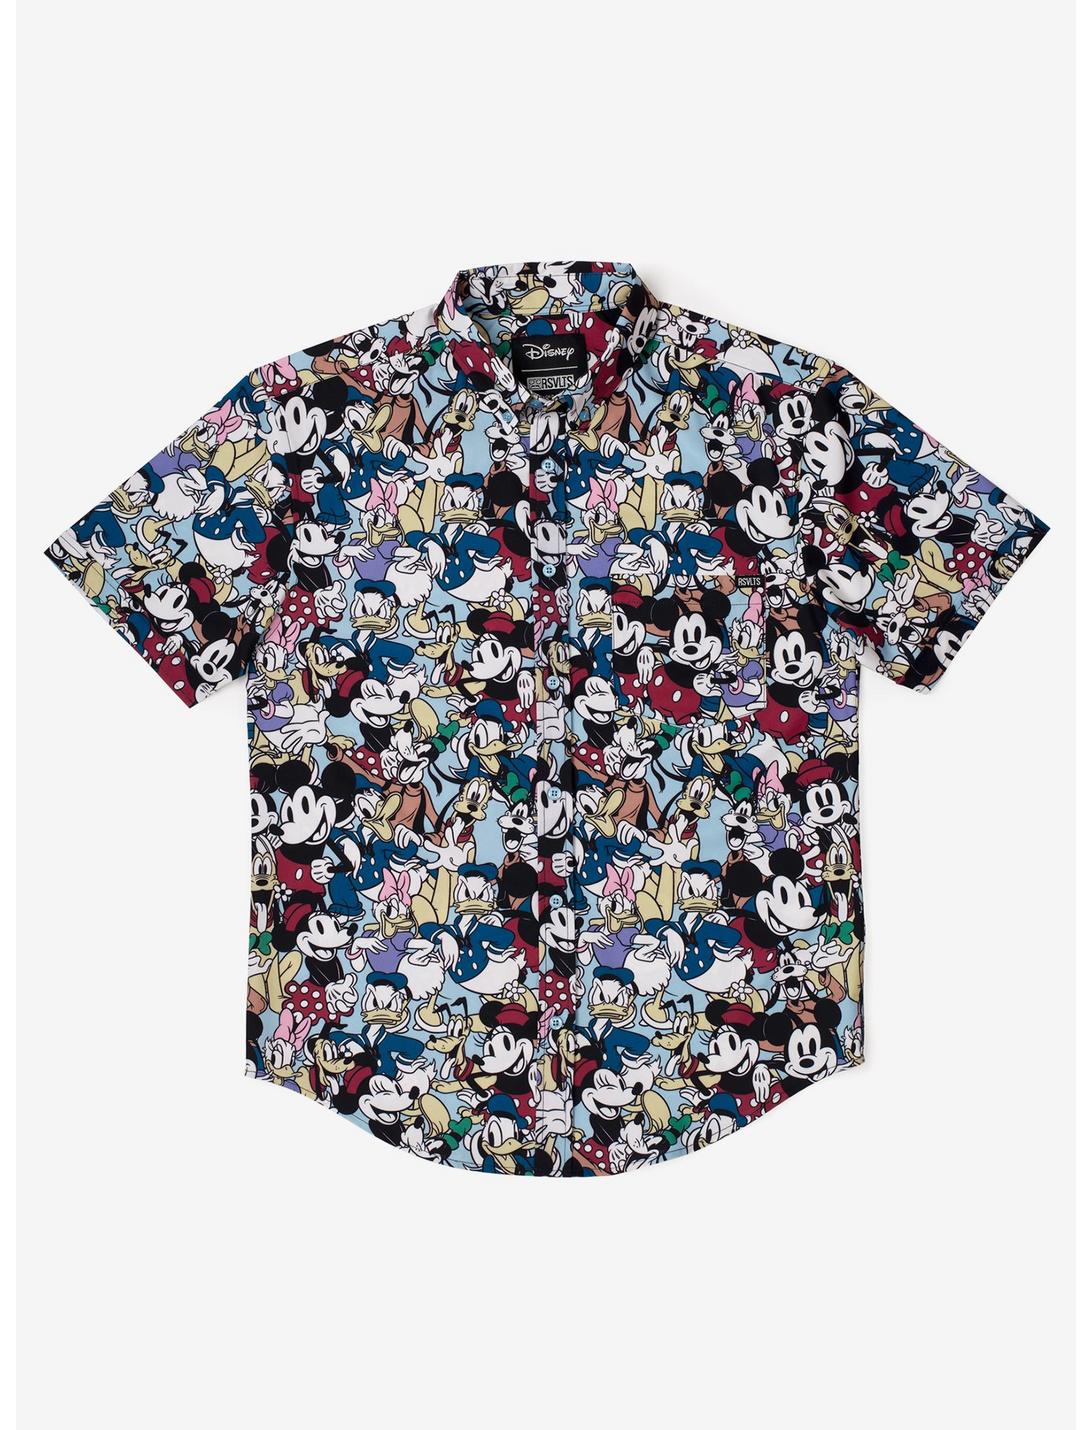 Disney100 x RSVLTS "The Gang's All Here" Button-Up Shirt, MULTI, hi-res